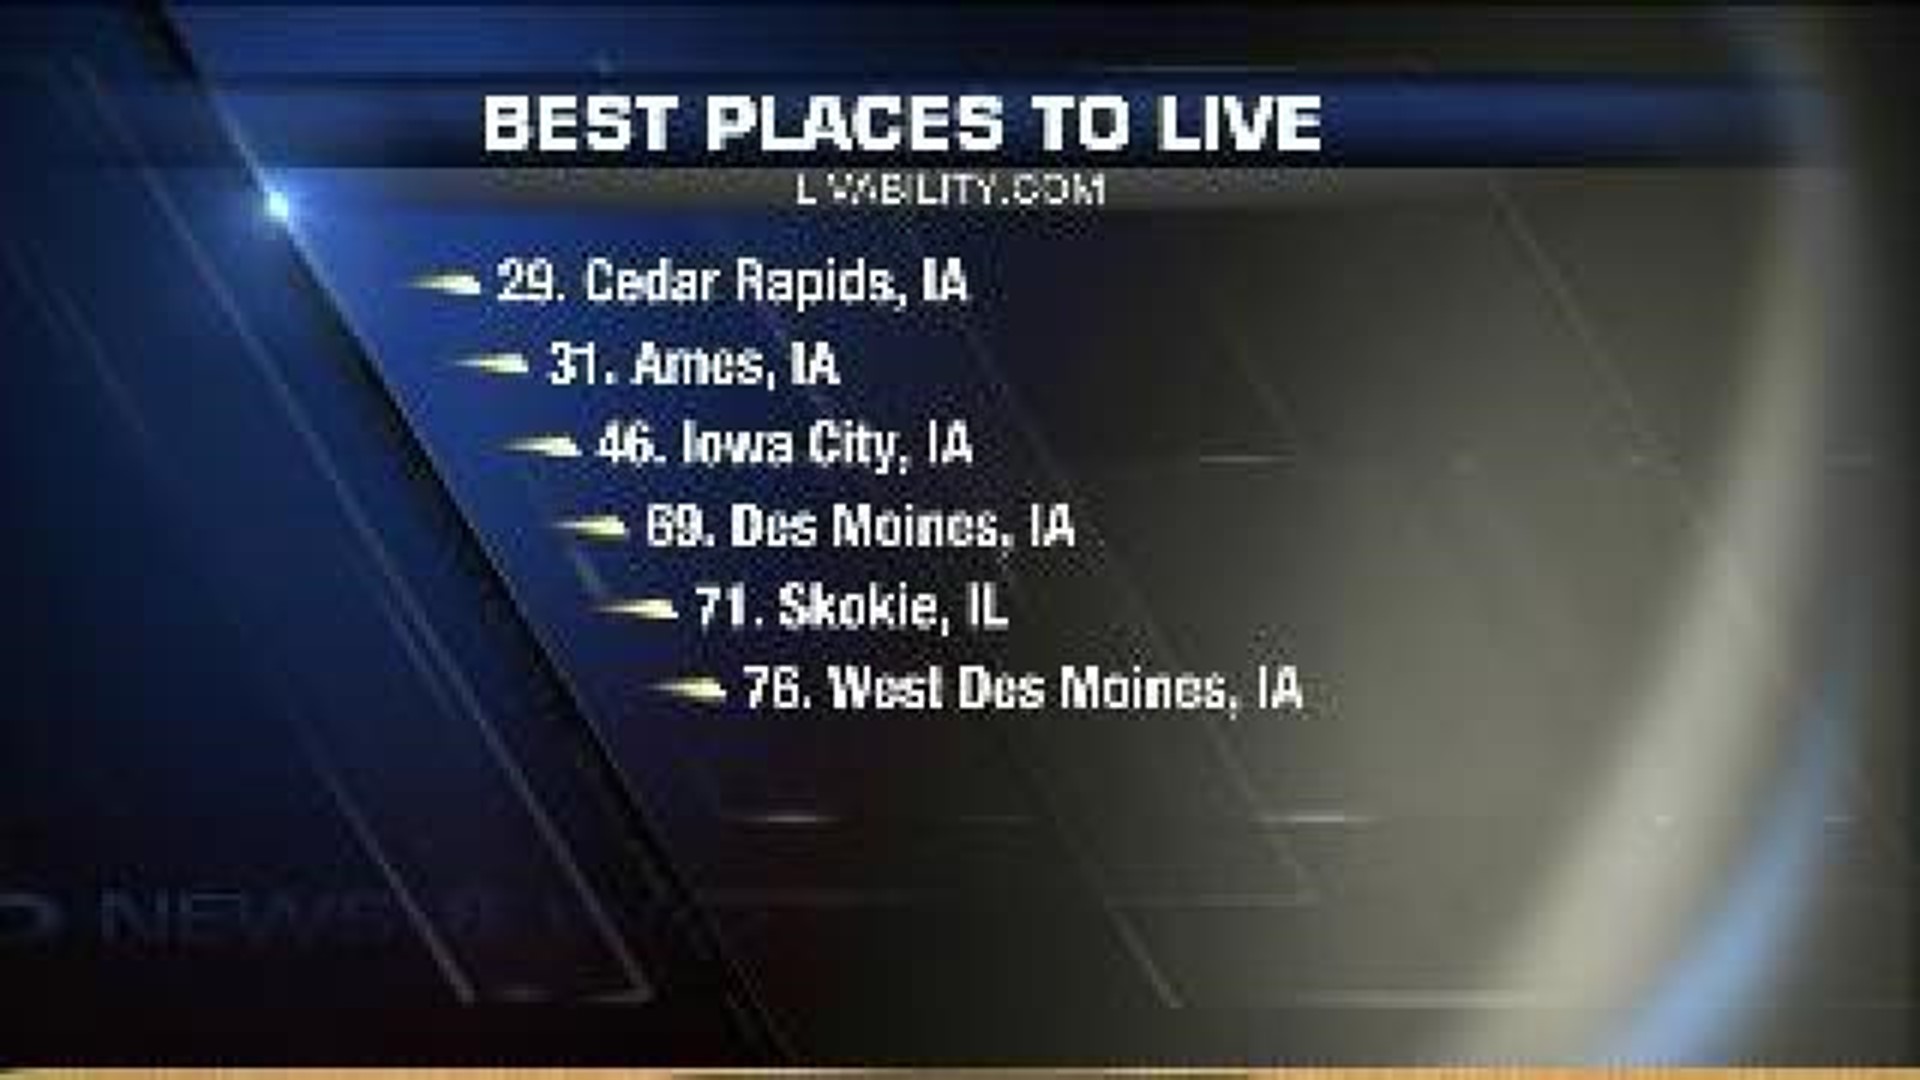 Five of the best places to live in Iowa